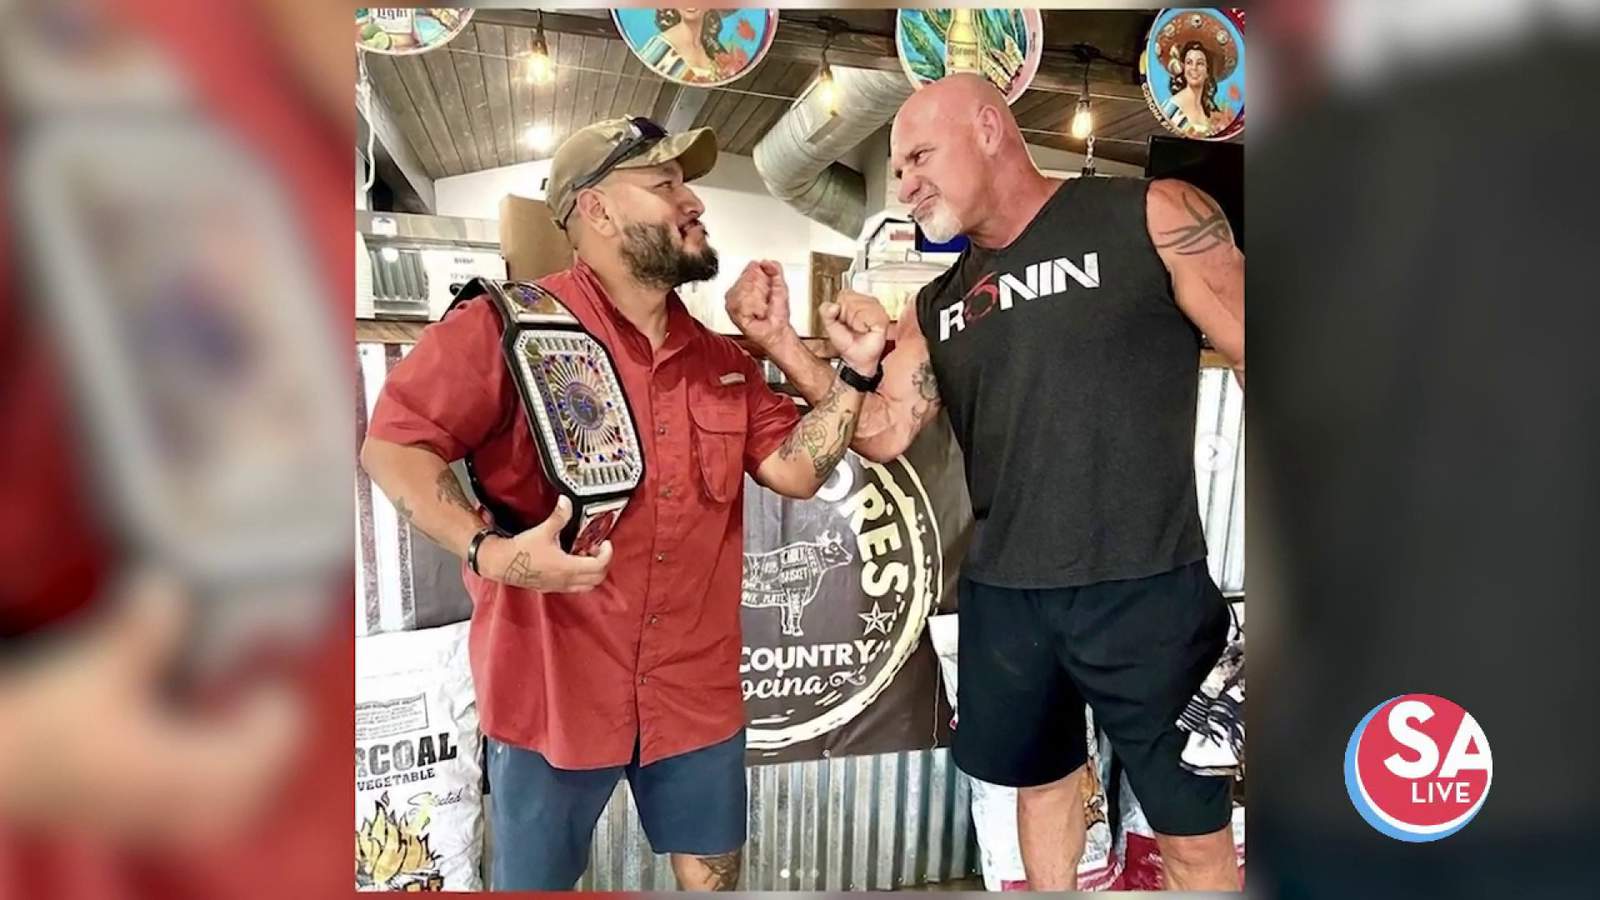 WWE Wrestling World Champion teams up with Los Compadres Hill Country Cocina to support veterans | SA Live | KSAT 12